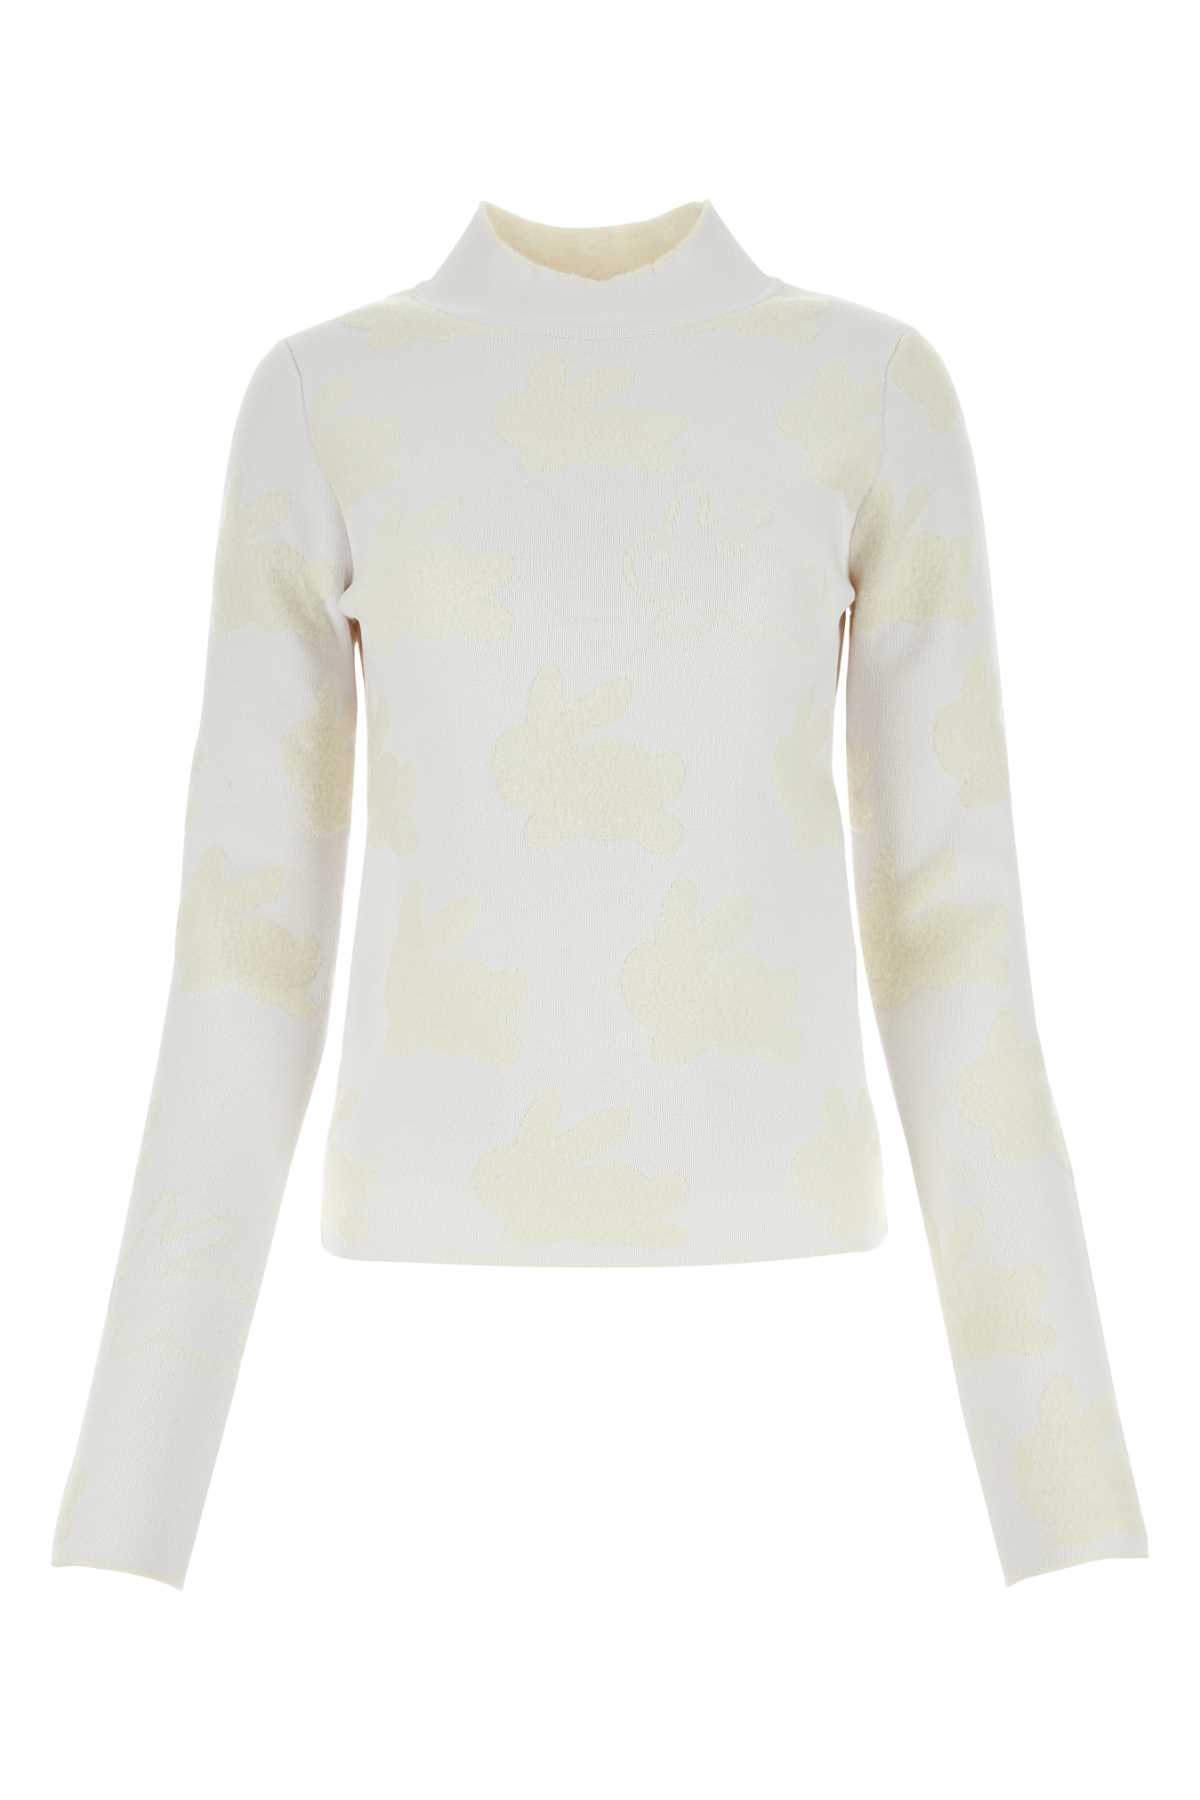 J.W. Anderson Embroidered Stretch Polyester Blend Sweater